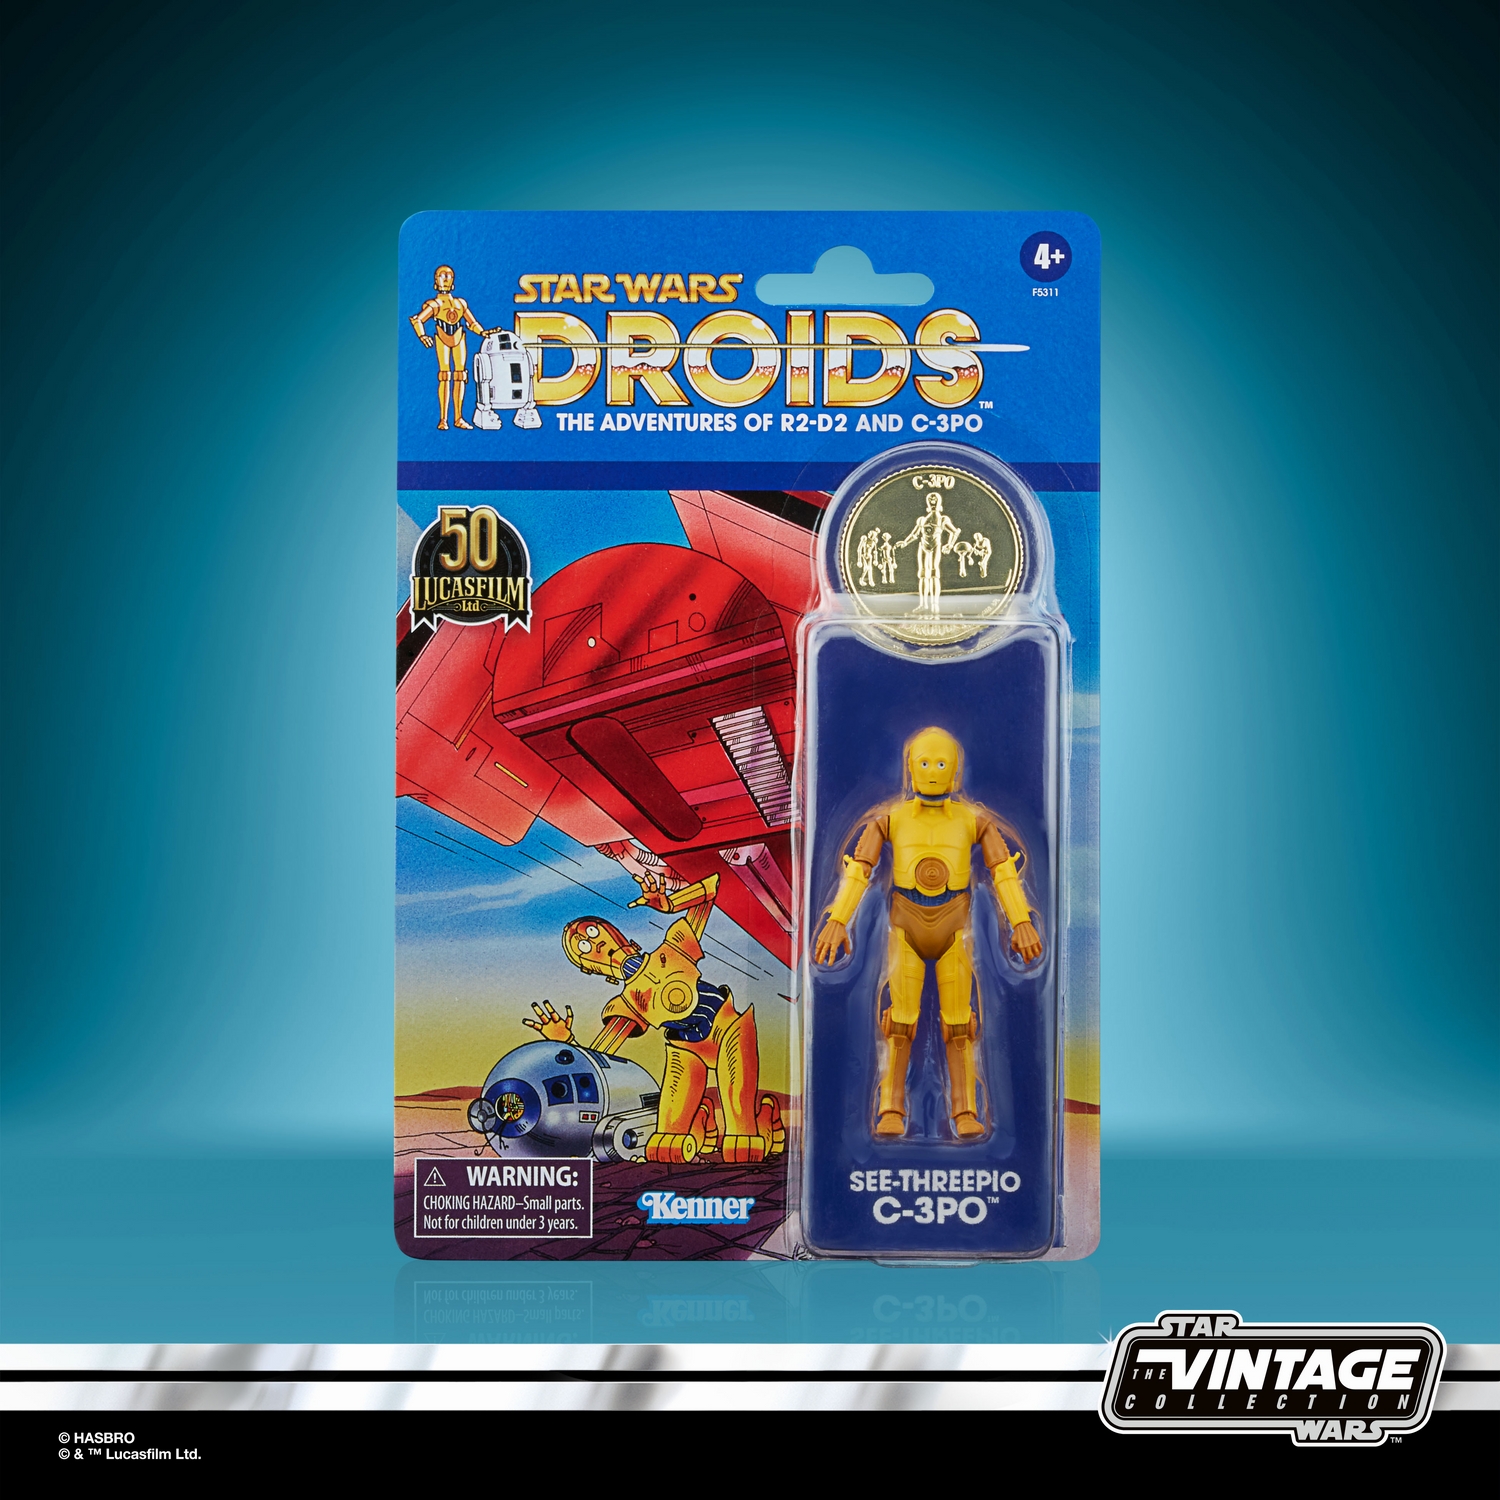 STAR WARS THE VINTAGE COLLECTION 3.75-INCH SEE-THREEPIO (C-3PO) Figure_in pck 1.jpg